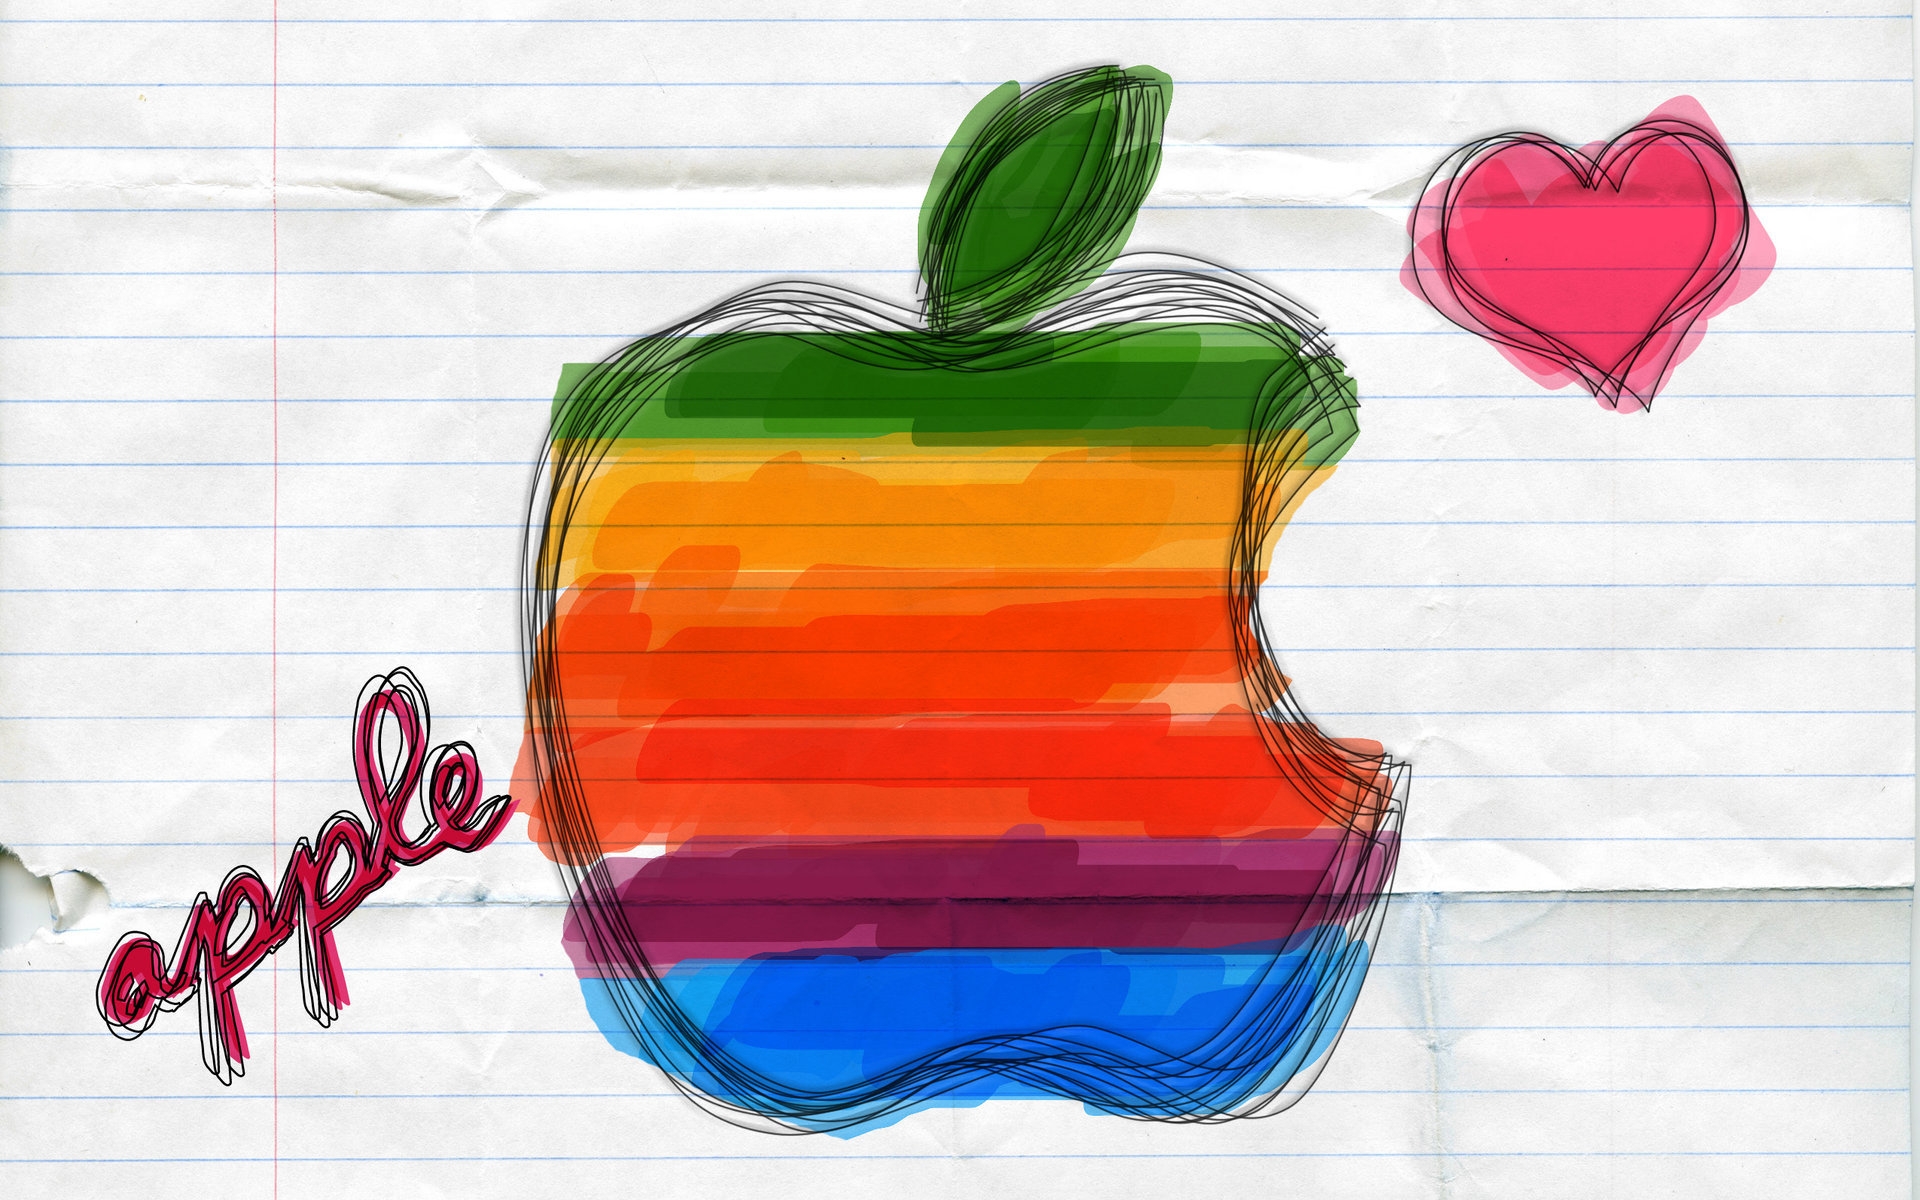 Colourful Apple logo for 1920 x 1200 widescreen resolution